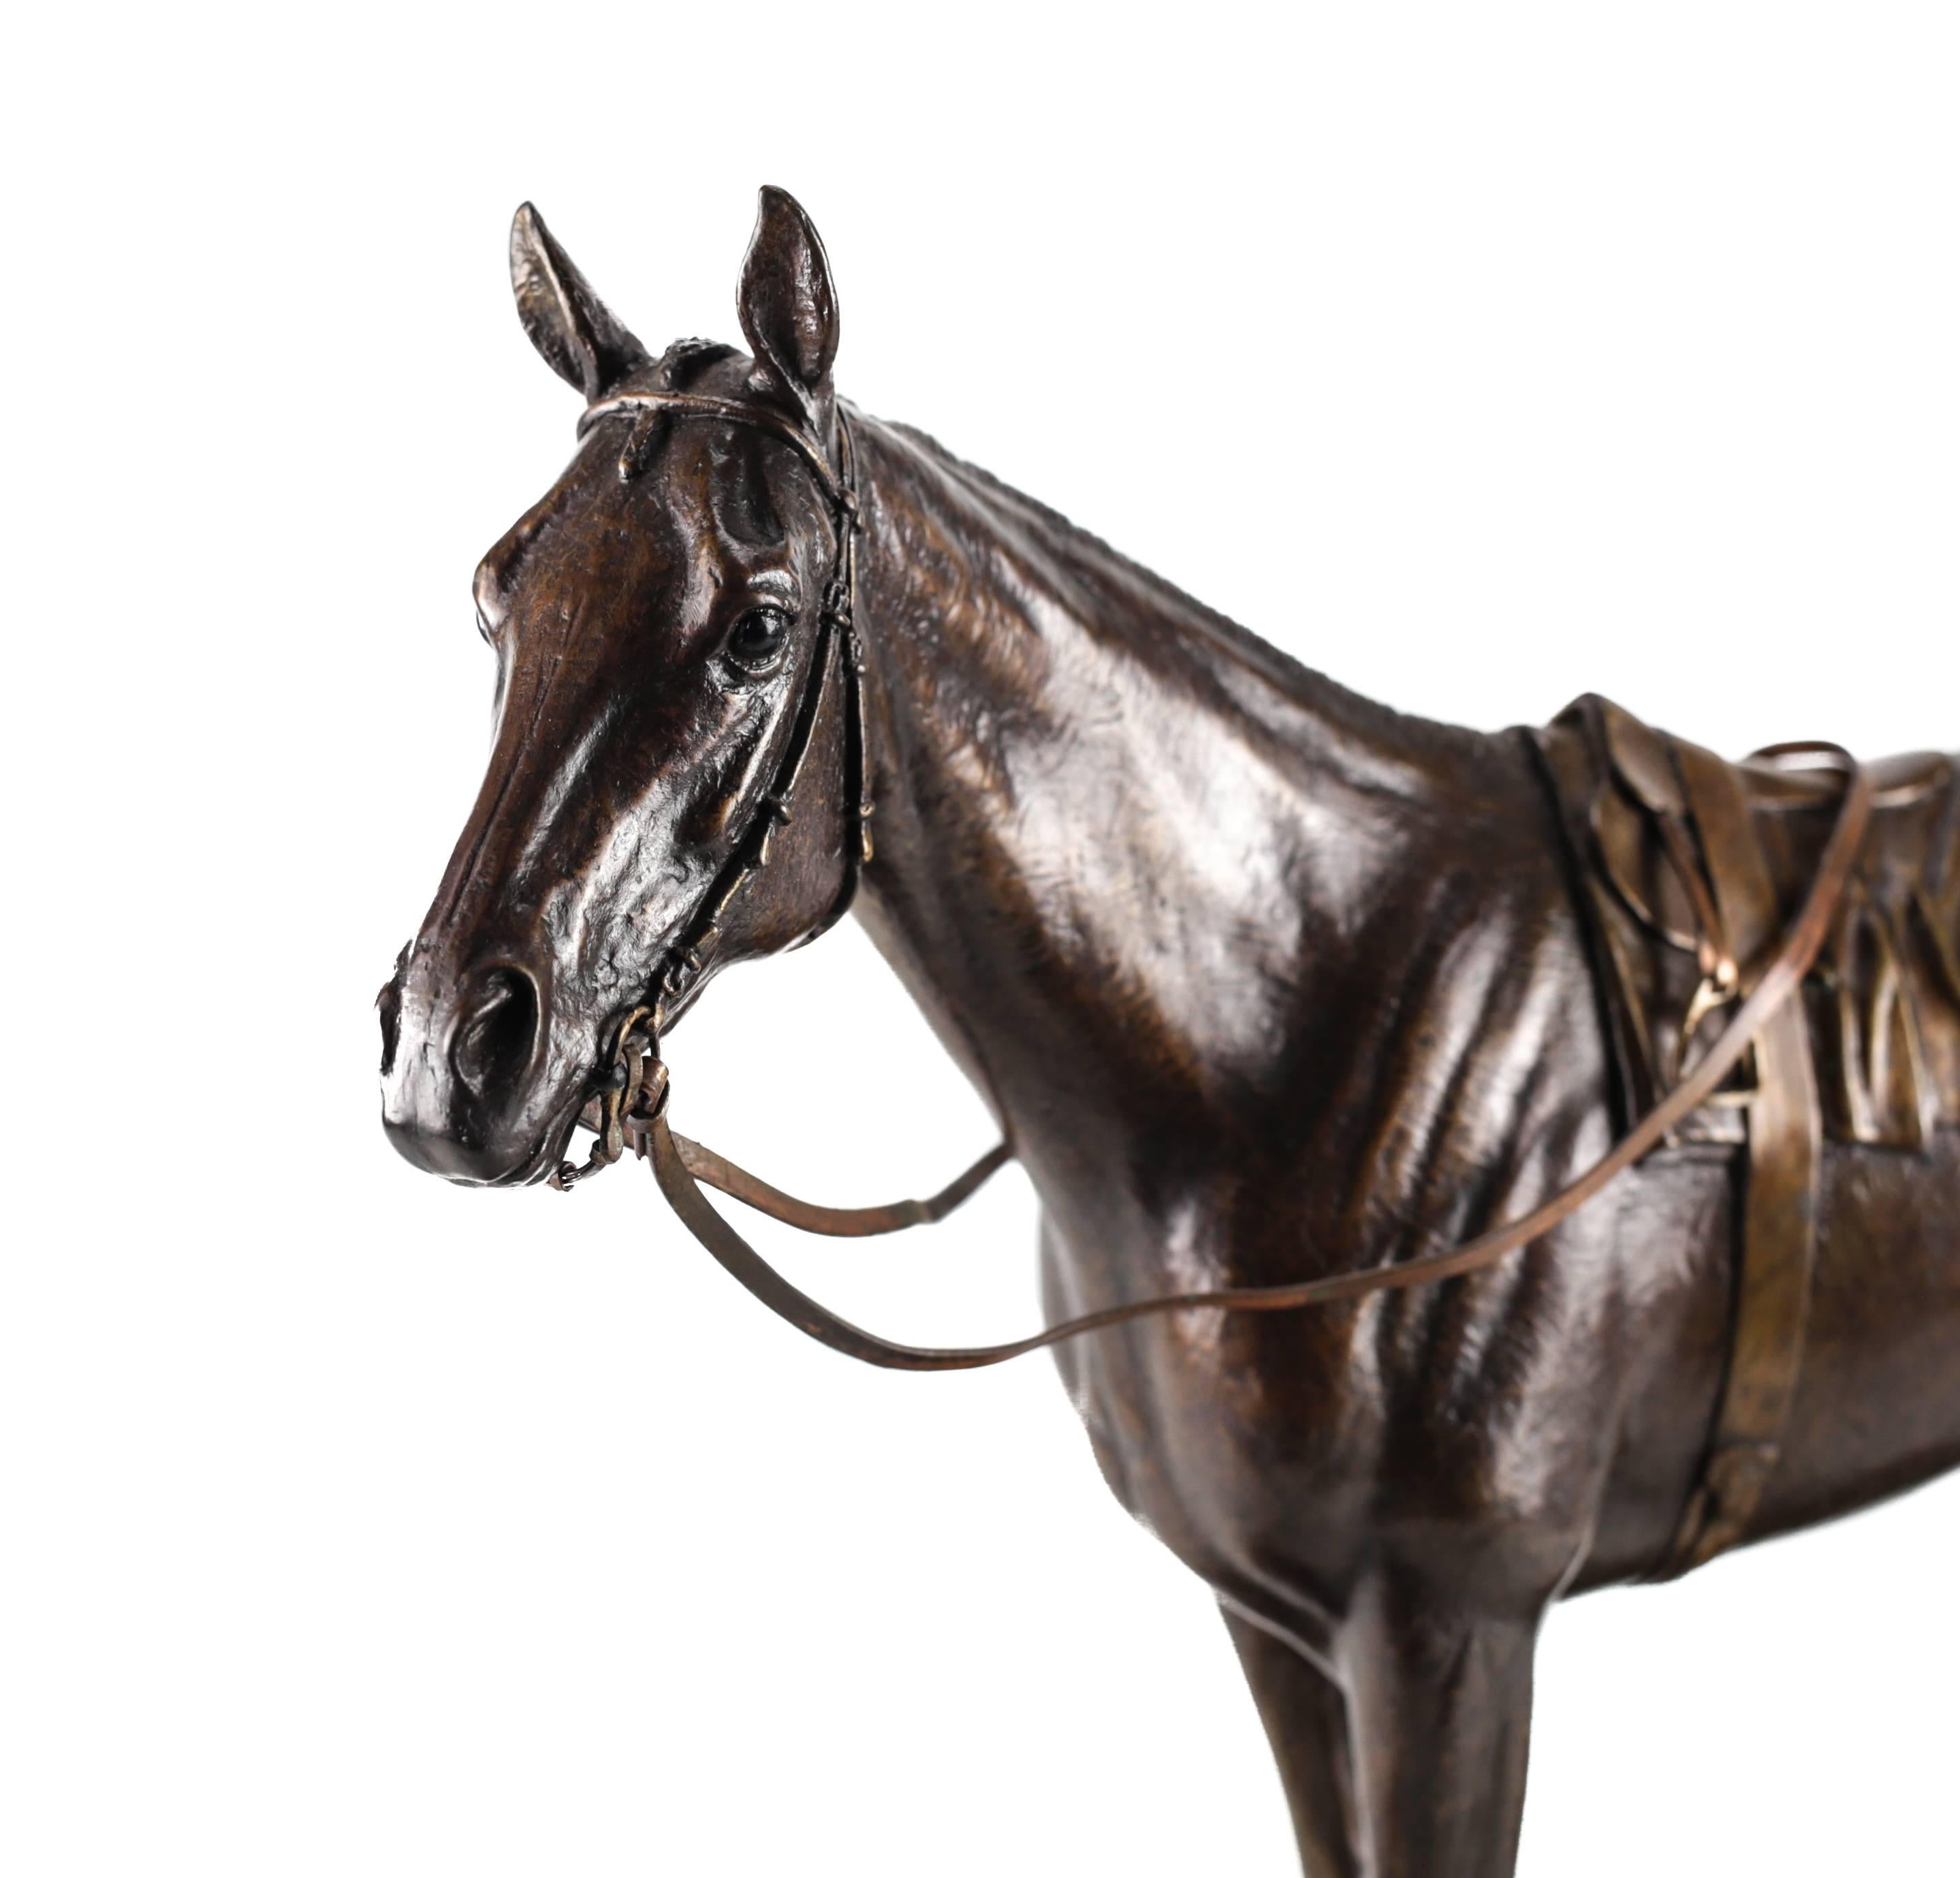 A realistically modeled patinated bronze sculpture of the 1980 Kentucky Derby winning thoroughbred race horse Genuine Risk by American artist Marilyn Newmark. 

This sculpture is an artist proof, having belonged to the artist herself and was